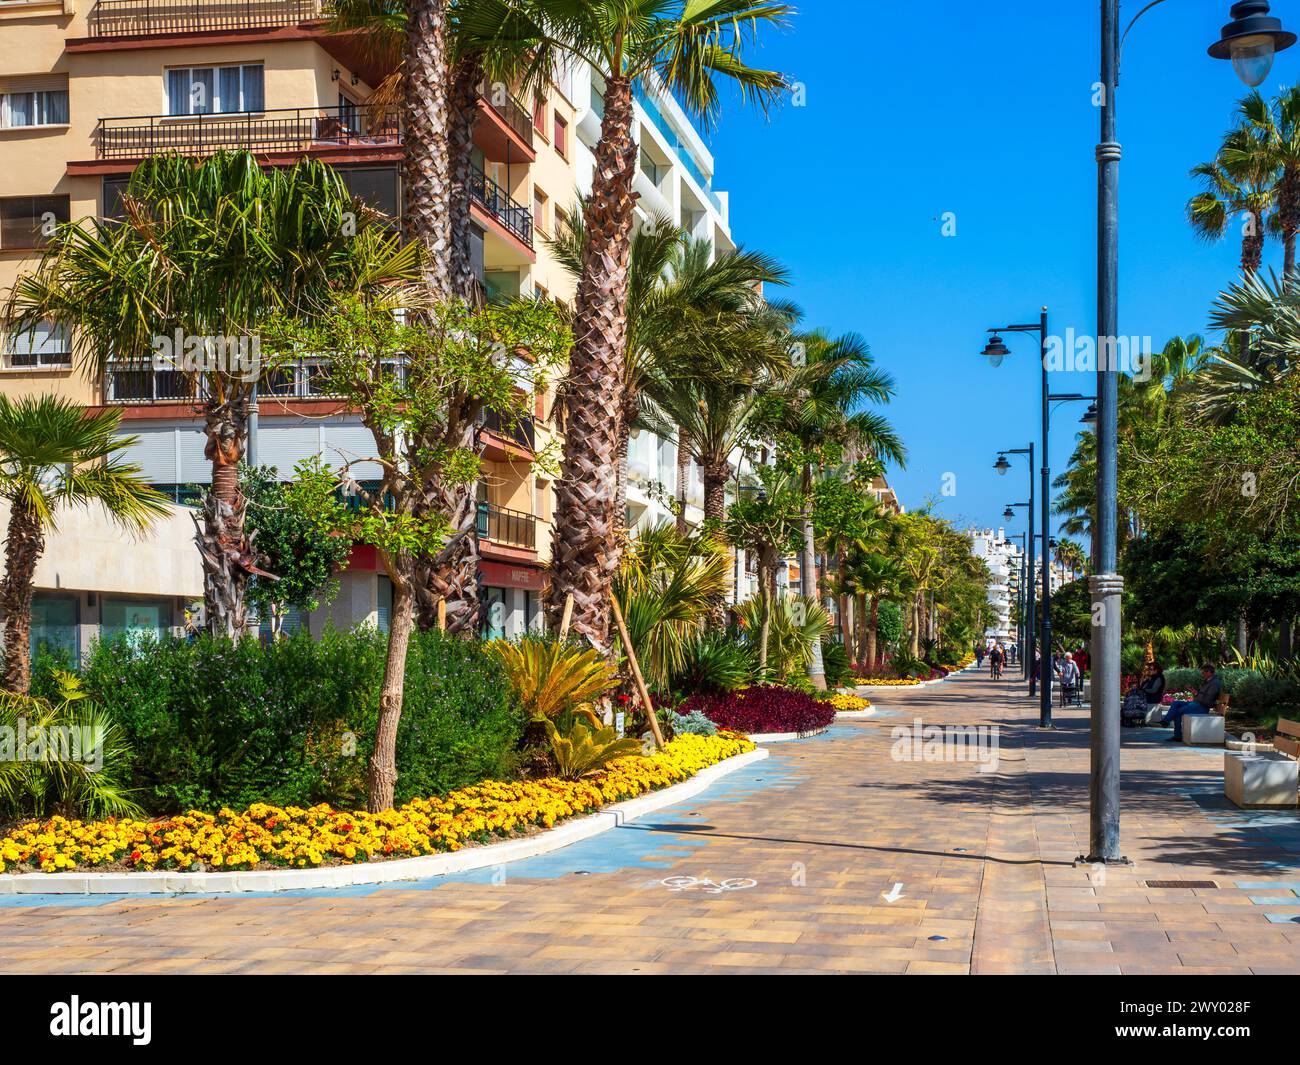 Typical Andalusian streets of Estepona, Spain Stock Photo